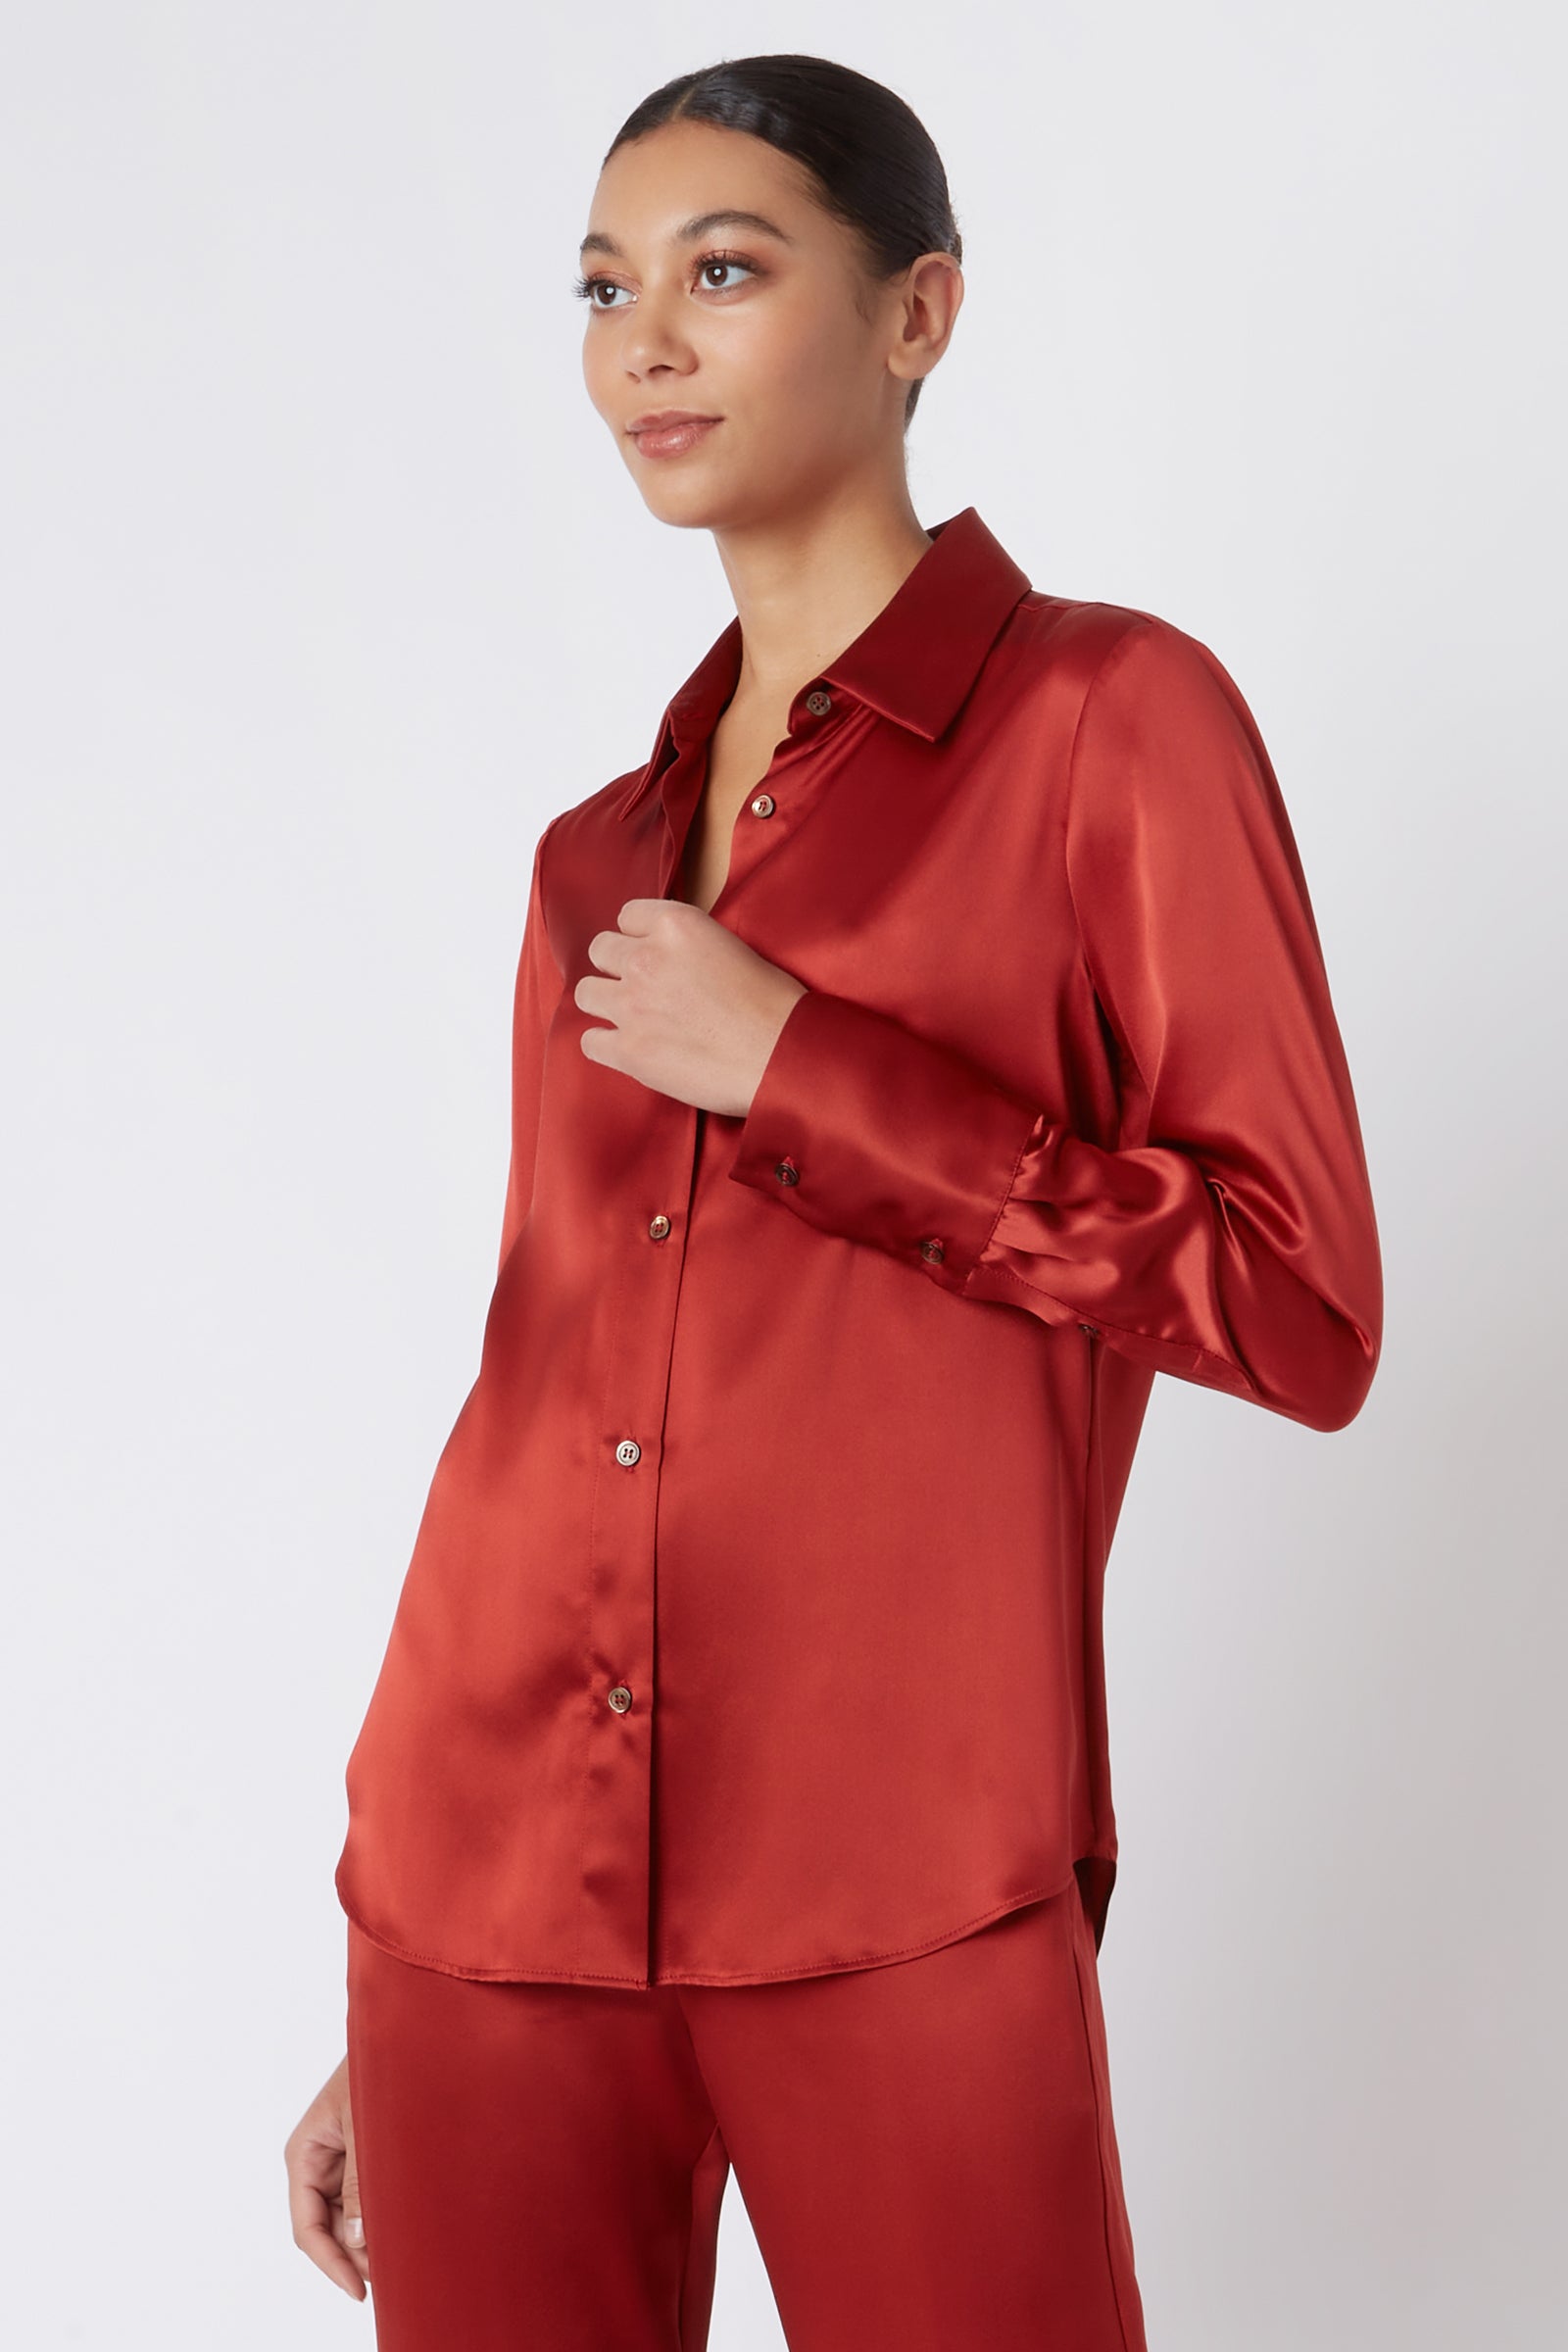 Kal Rieman Classic Tailored Blouse in Rust Silk on Model Cropped Front Side View